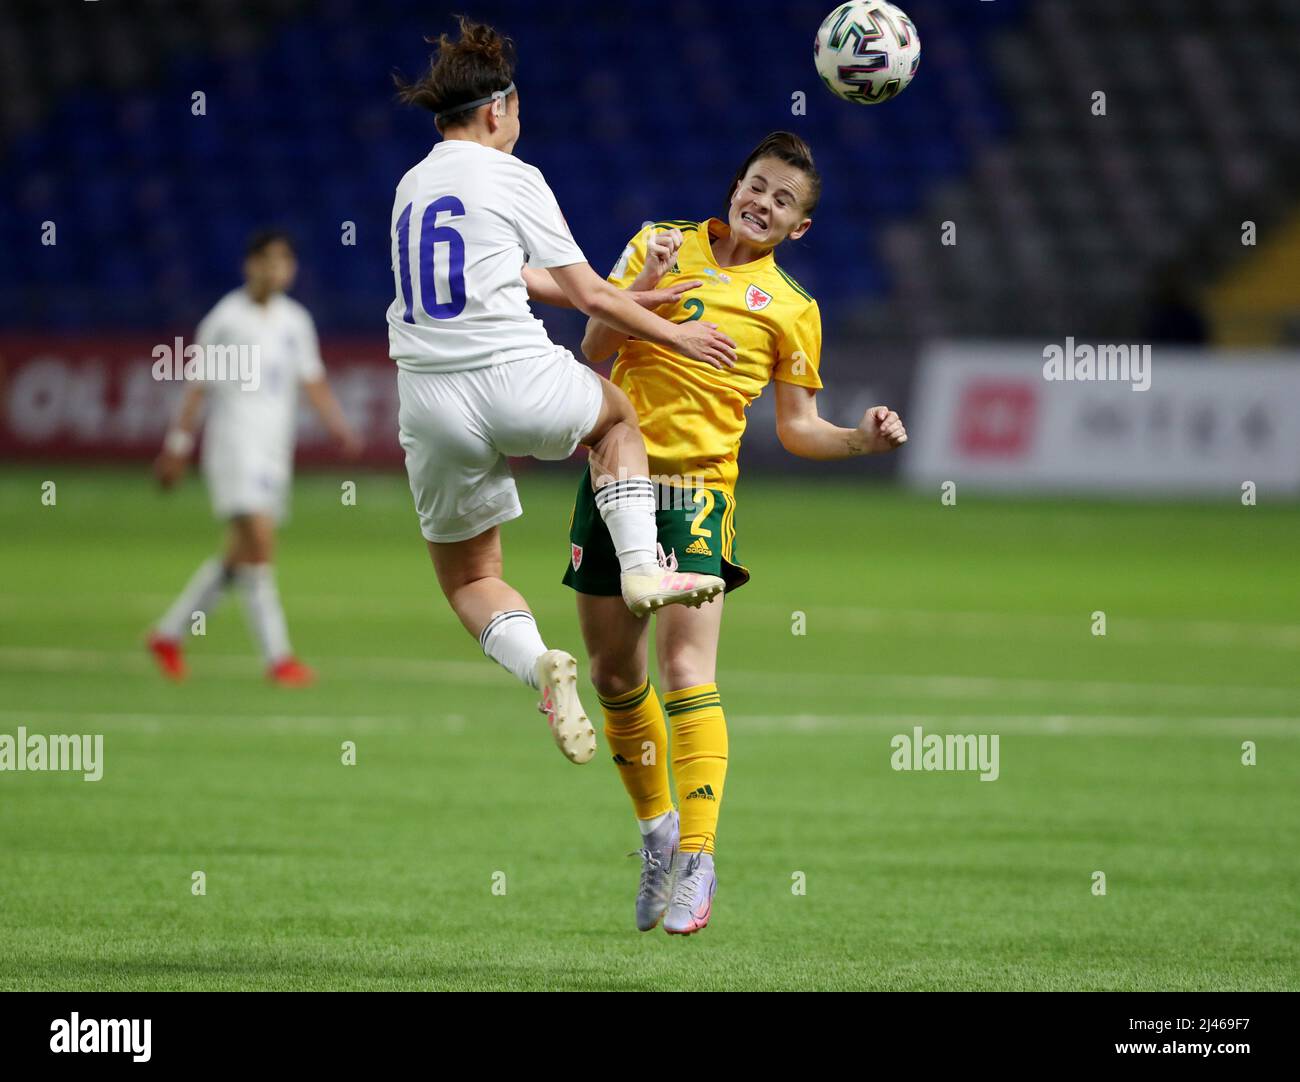 Soccer Football - FIFA Women's World Cup - UEFA Qualifiers - Group I - Kazakhstan v Wales - Astana Arena, Nur-Sultan, Kazakhstan - April 12, 2022 Wales' Lily Woodham in action with Kazakhstan's Asselkhan Turlybekova REUTERS/Pavel Mikheyev Stock Photo